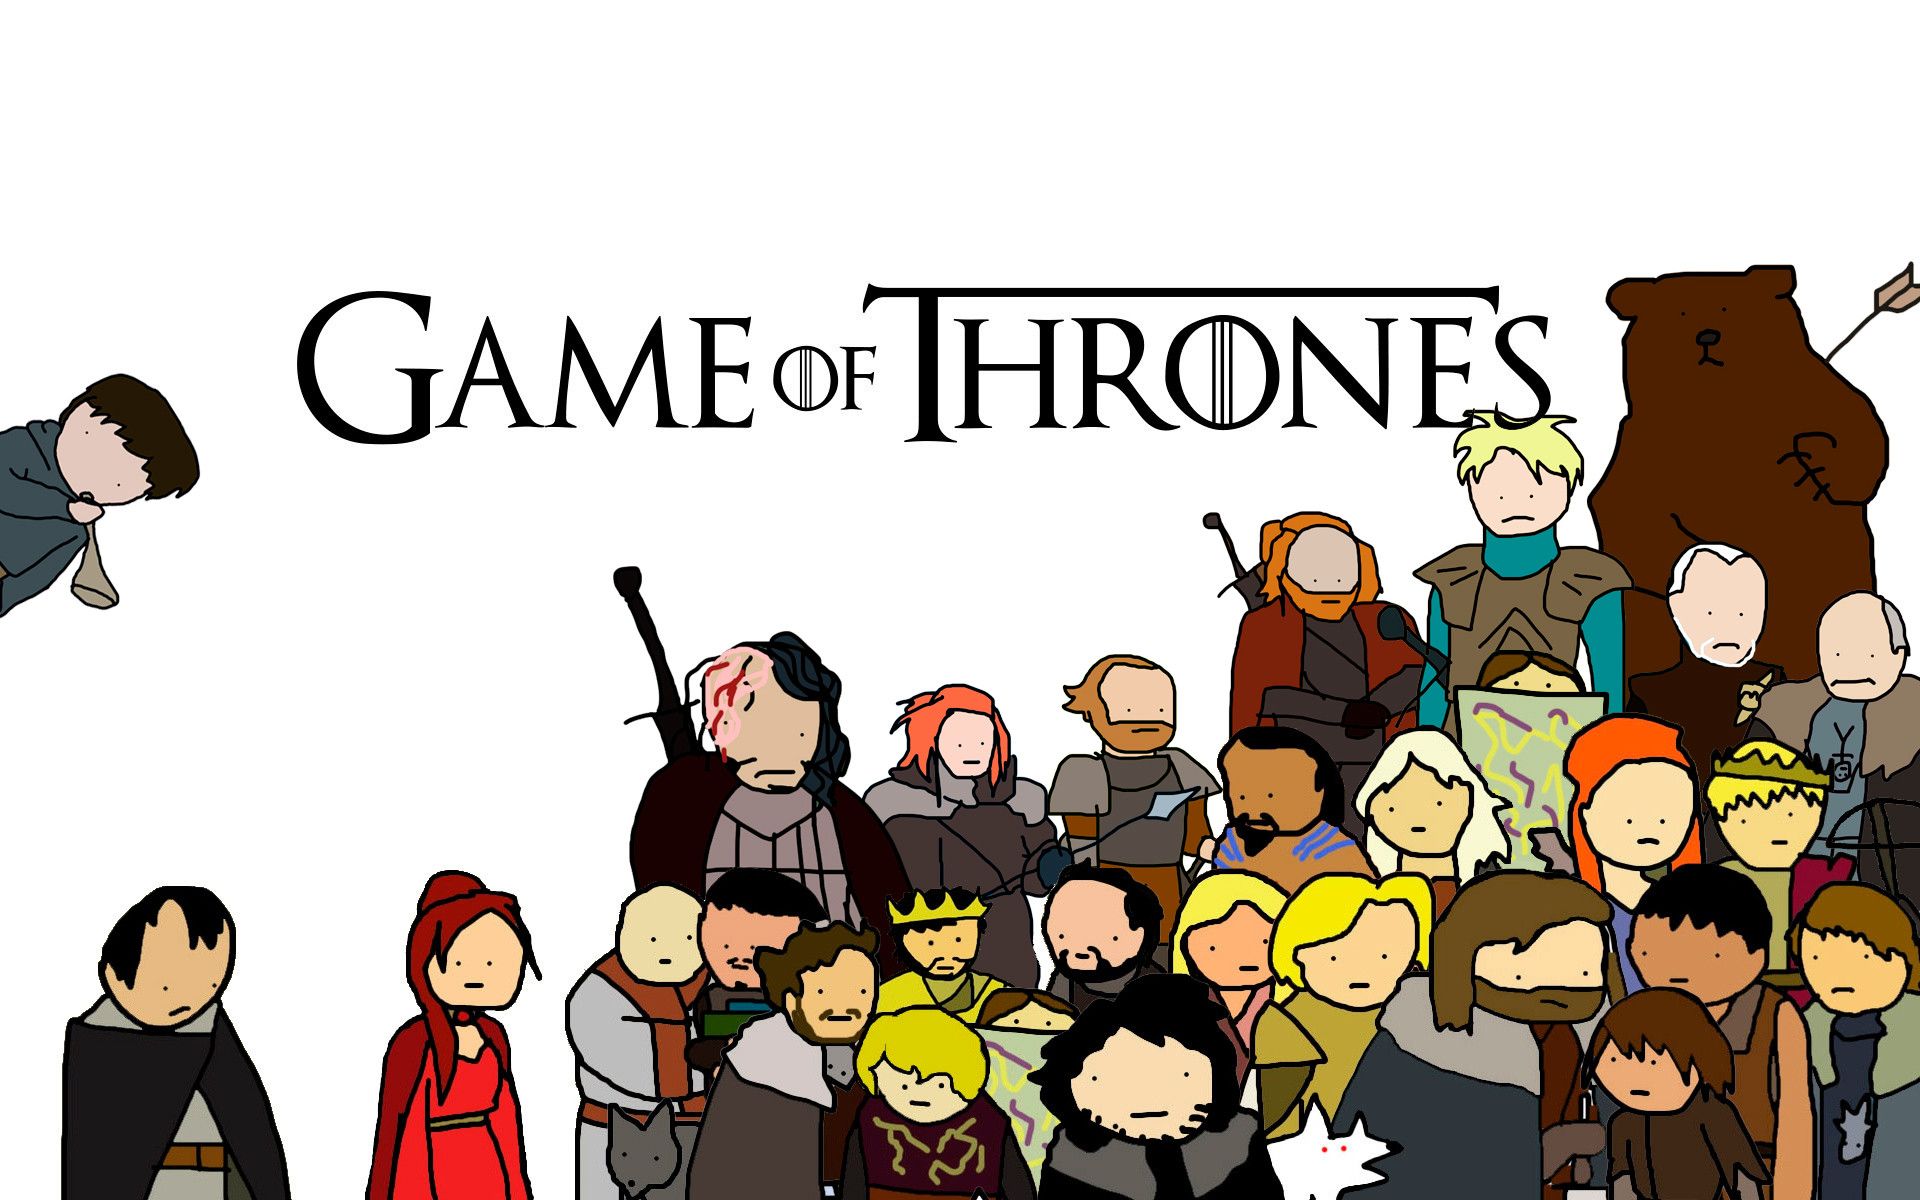 chloe choi recommends game of thrones cartoon parody pic